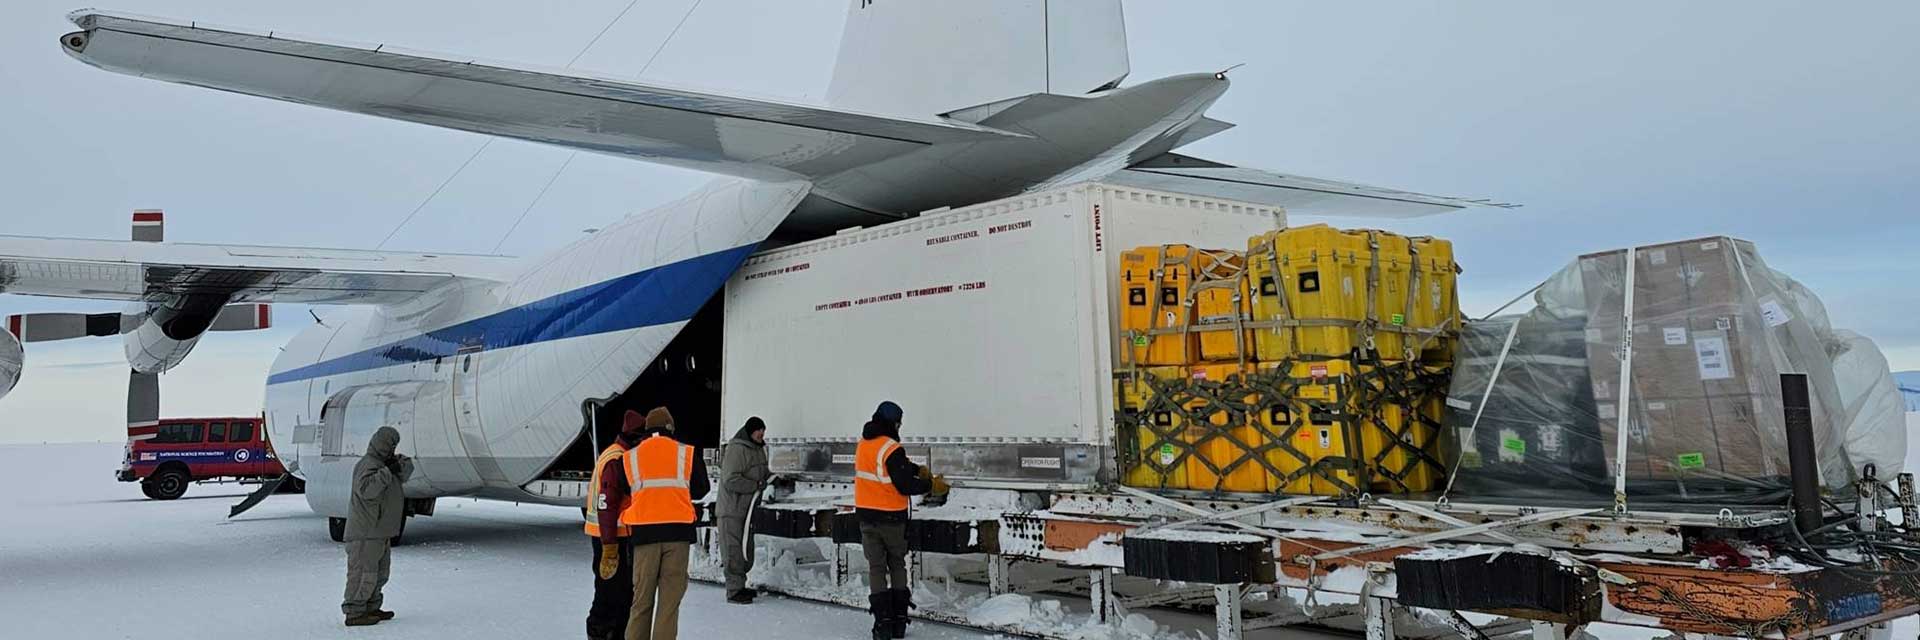 A white airplane sits on the snow at McMurdo Station, Antarctica. Workers, some wearing orange vests, stand near a big white cargo container which is in the tail of the plane. Several smaller yellow and orange containers are behind the white container. They are wrapped in netting. Some brown boxes under plastic are strapped down behind the other containers.